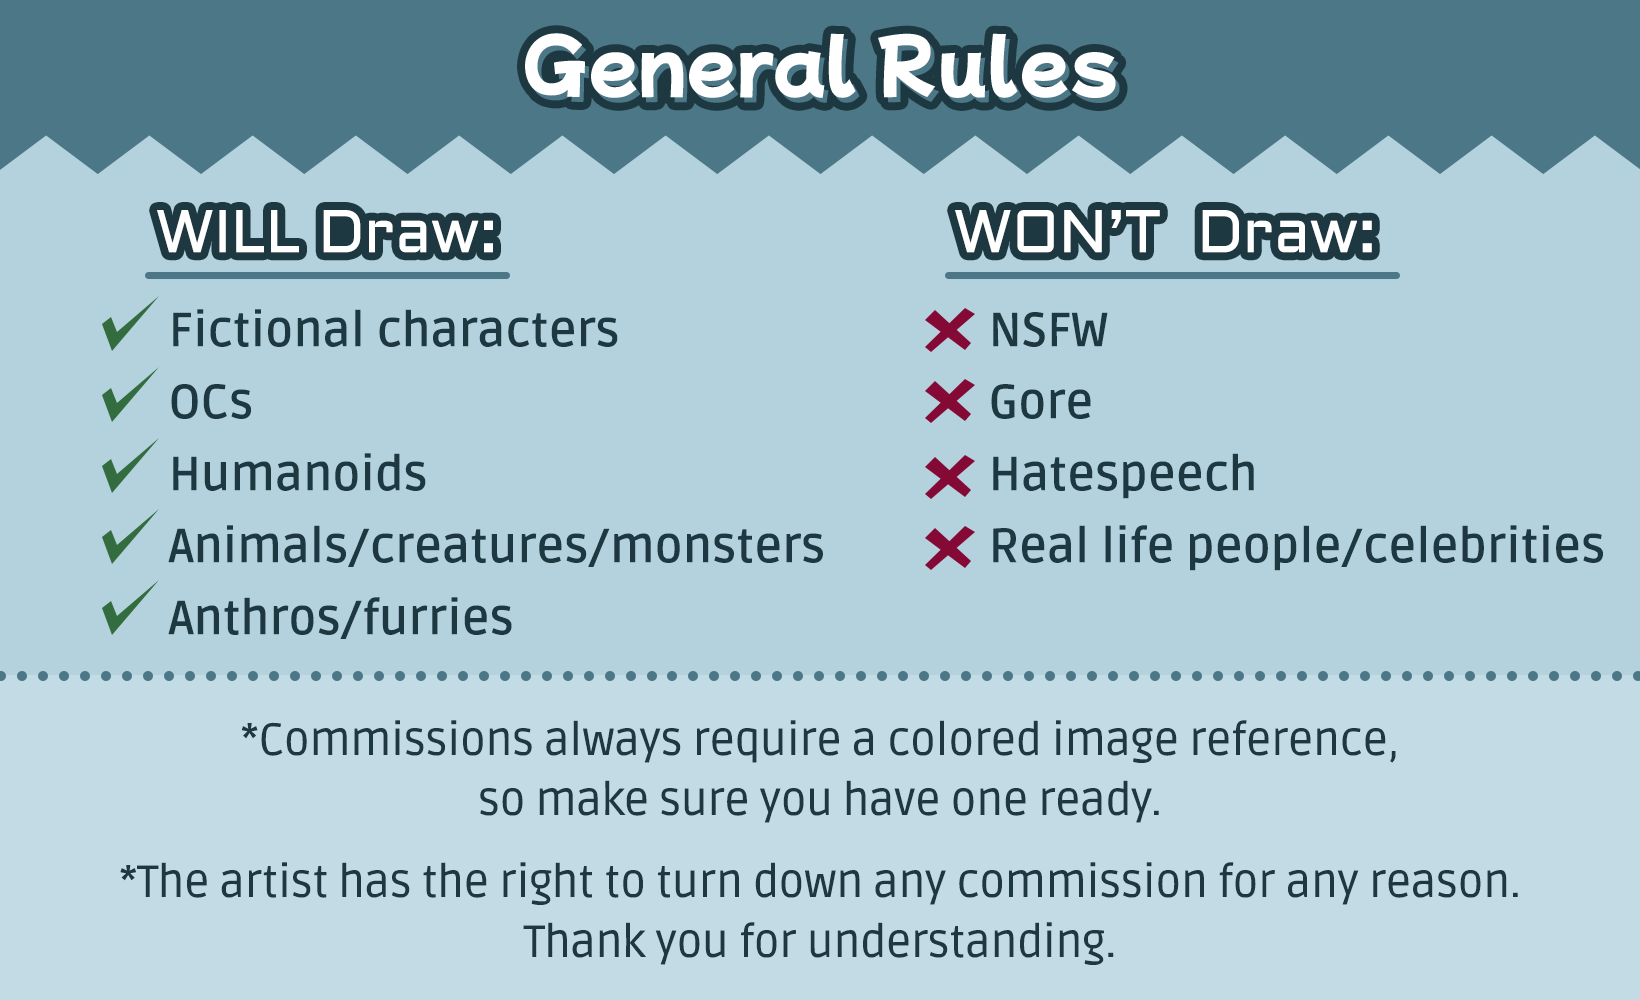 General Rules 2.0